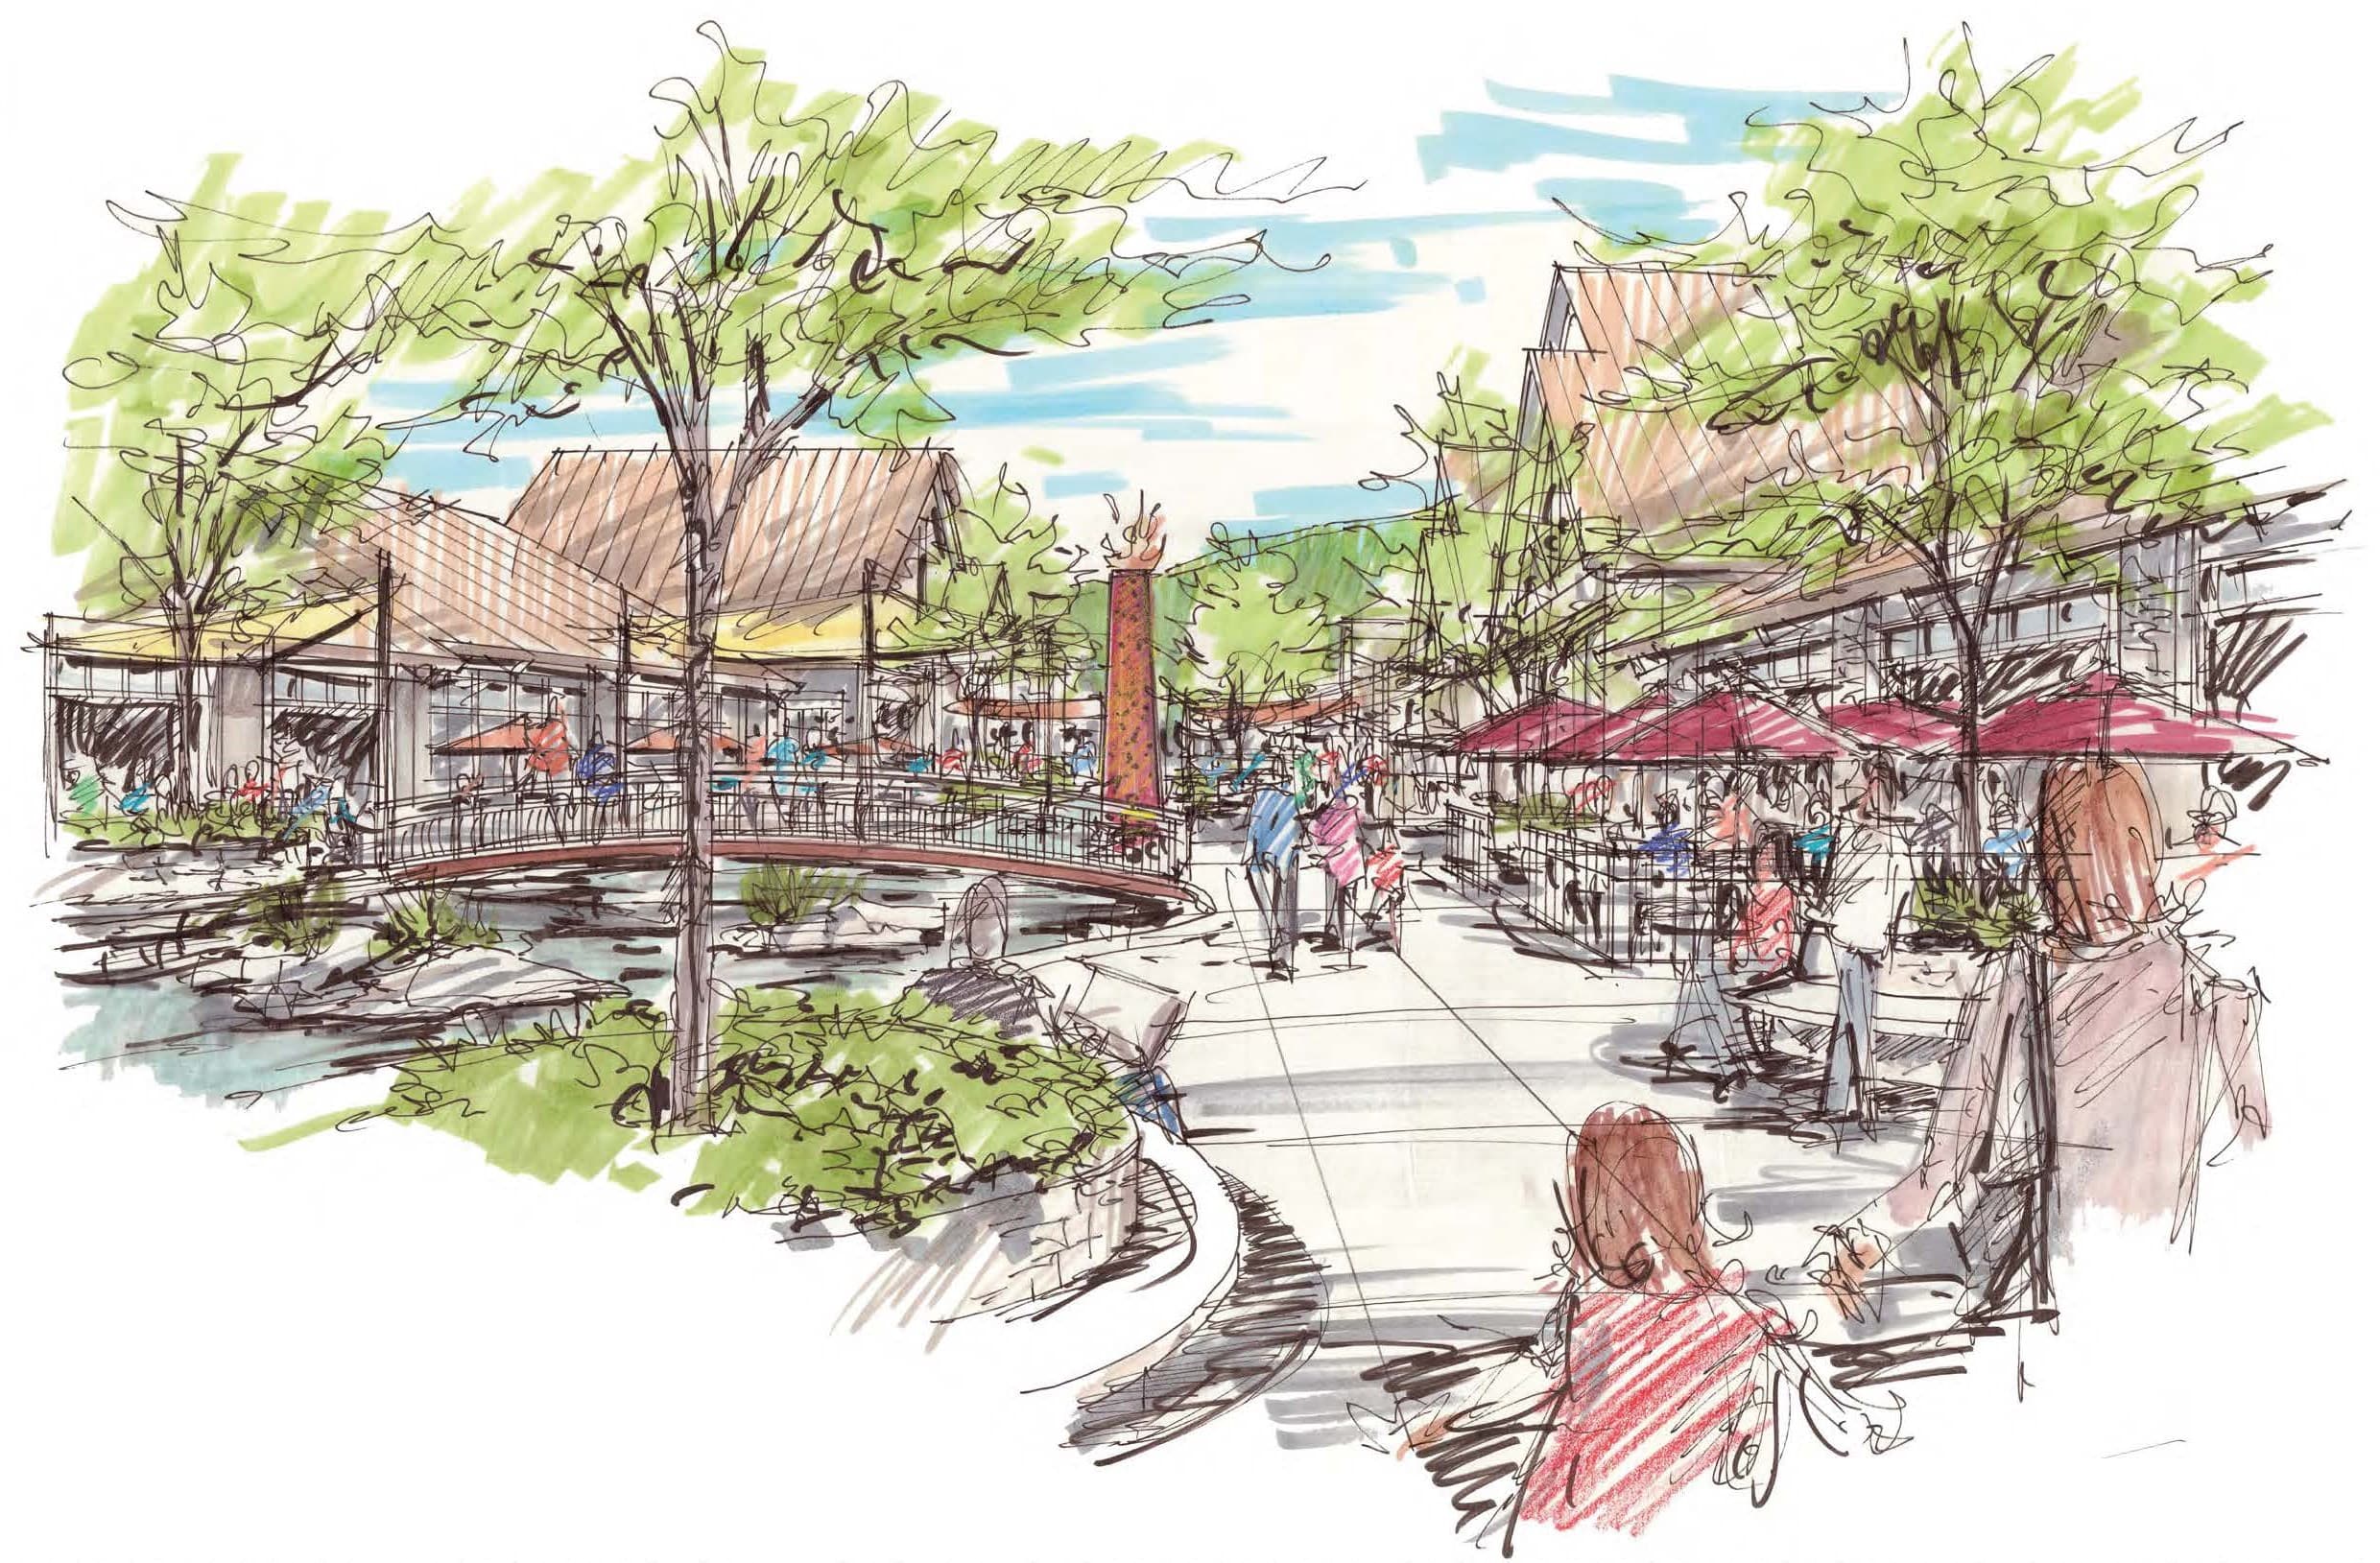 Featured image for “American Society of Landscape Architects in North Carolina recognizes Johnson Architecture, IBI Placemaking for Cherokee Cultural Corridor plan”